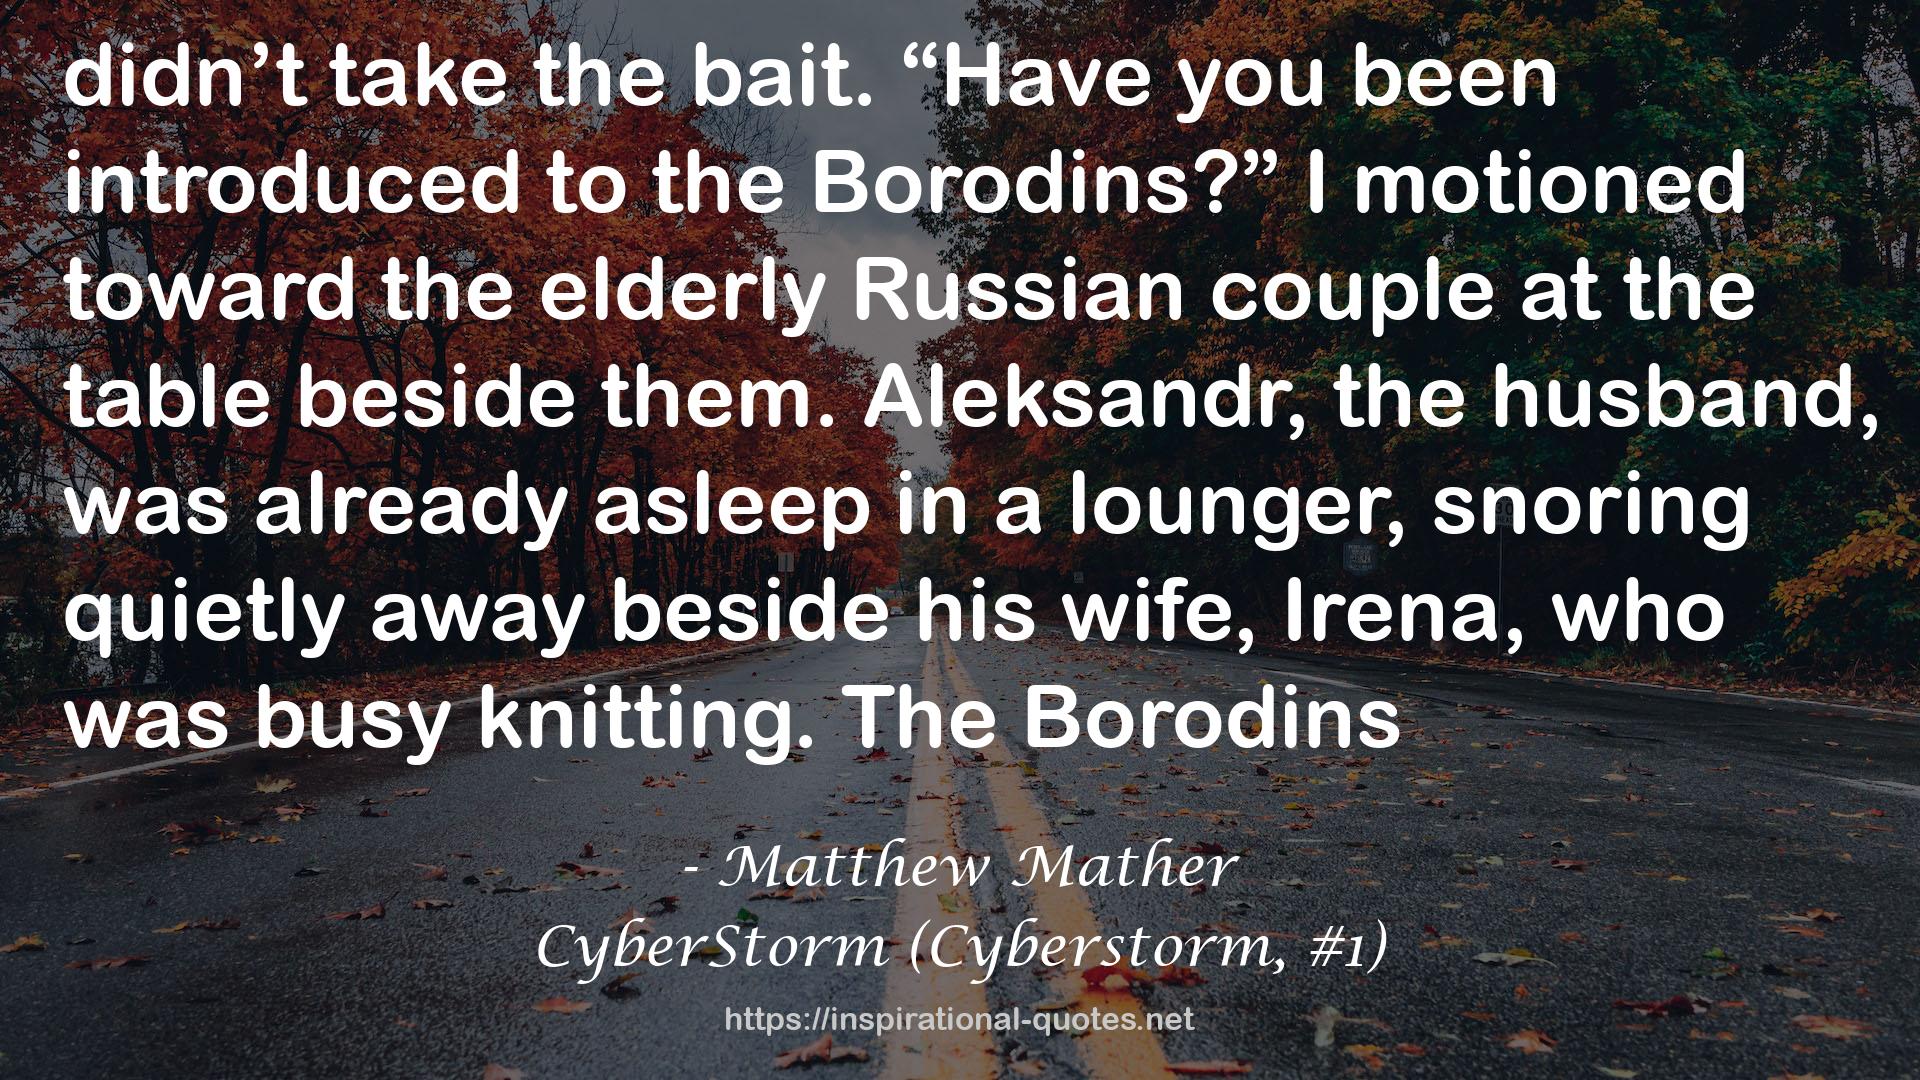 CyberStorm (Cyberstorm, #1) QUOTES